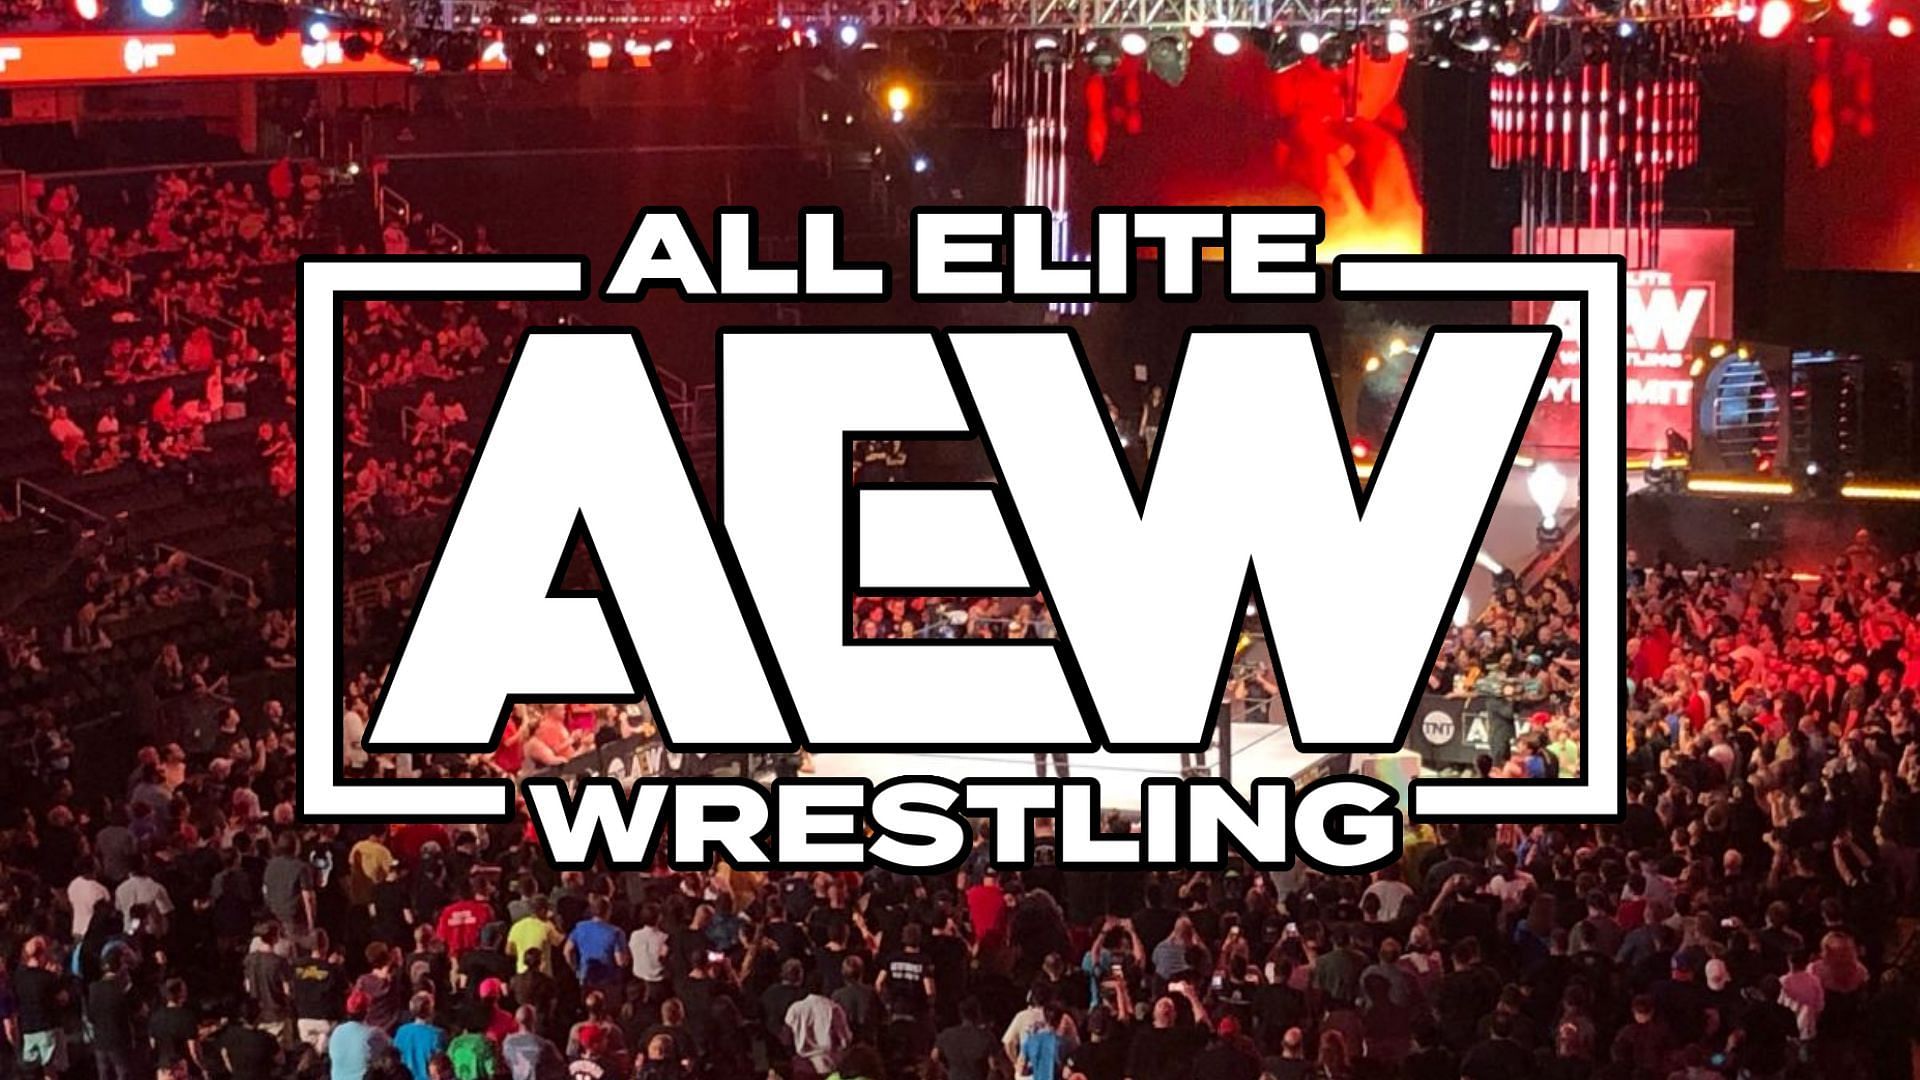 Could this spell disaster for AEW